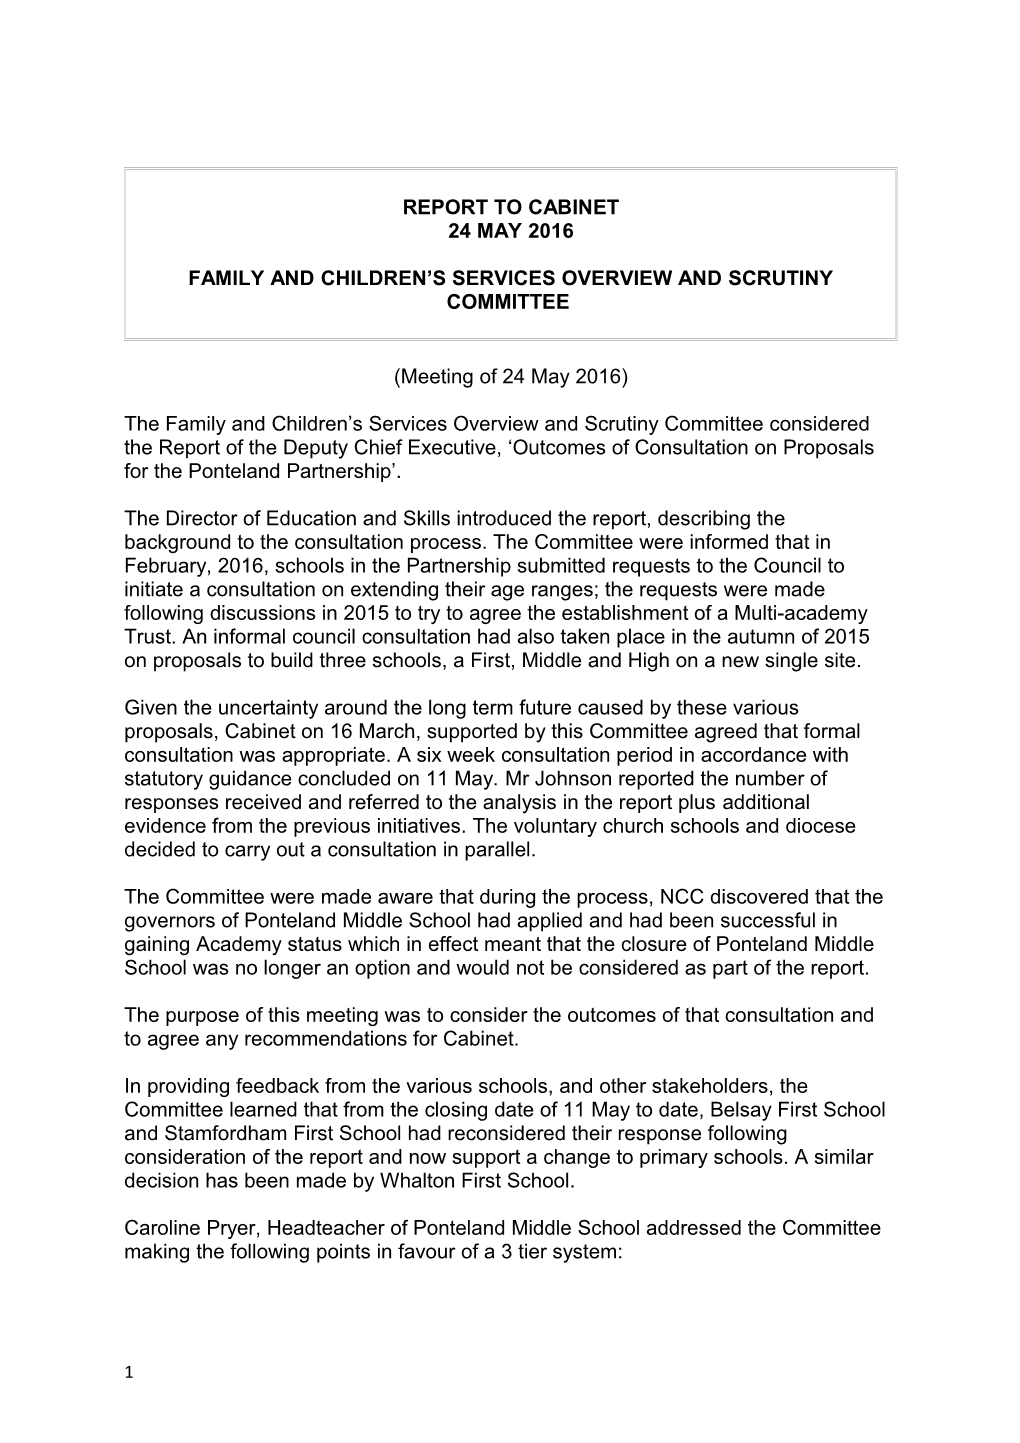 Family and Children S Services Overview and Scrutiny Committee